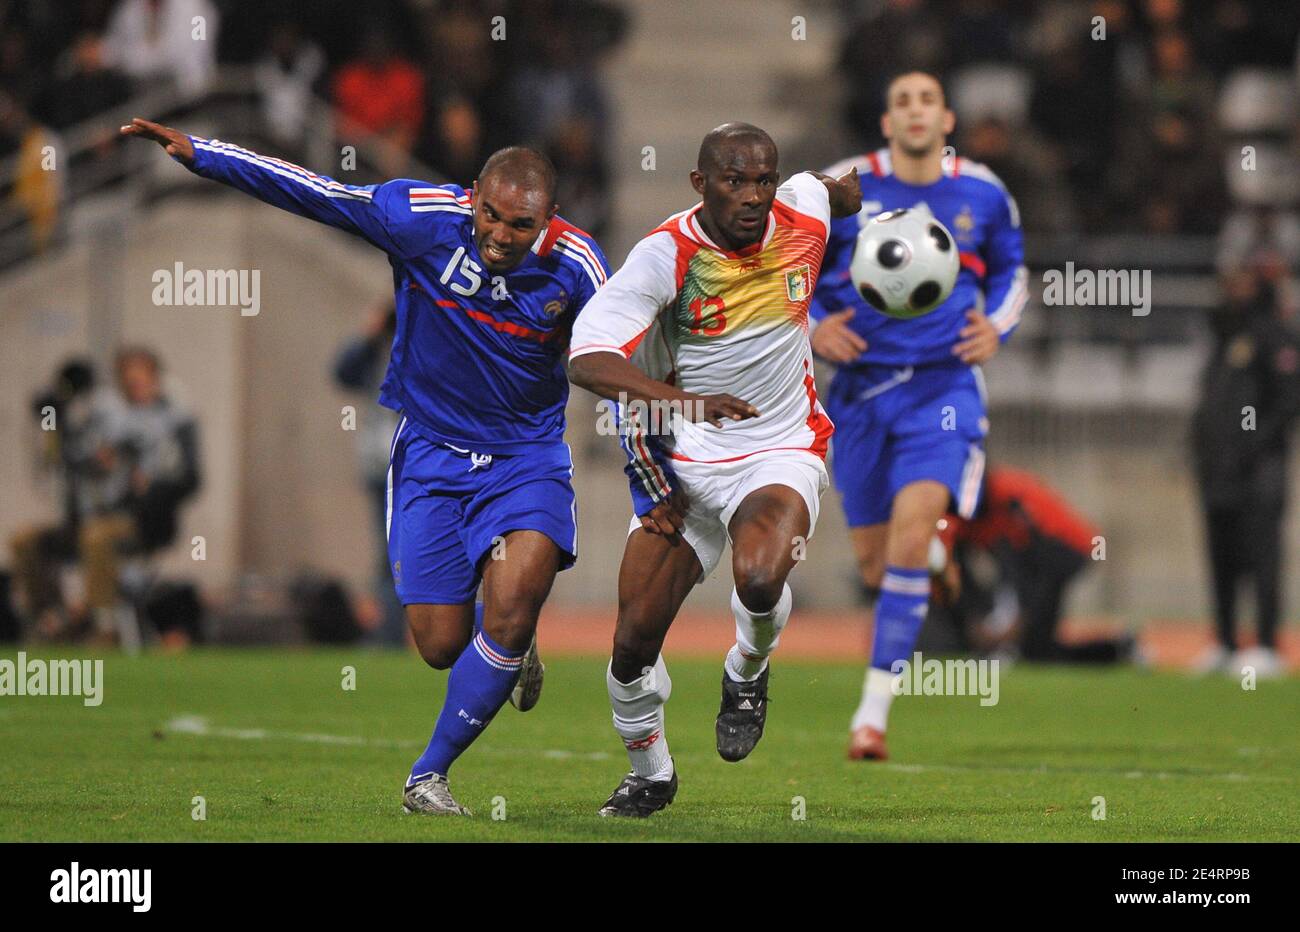 Mali's Mamadou Diallo challenges France's Florent Sinama Pongolle during  the friendly soccer match, France A' vs Mali at the Charlety stadium in  Paris, France on March 25, 2008. France defeats Mali 3-2.